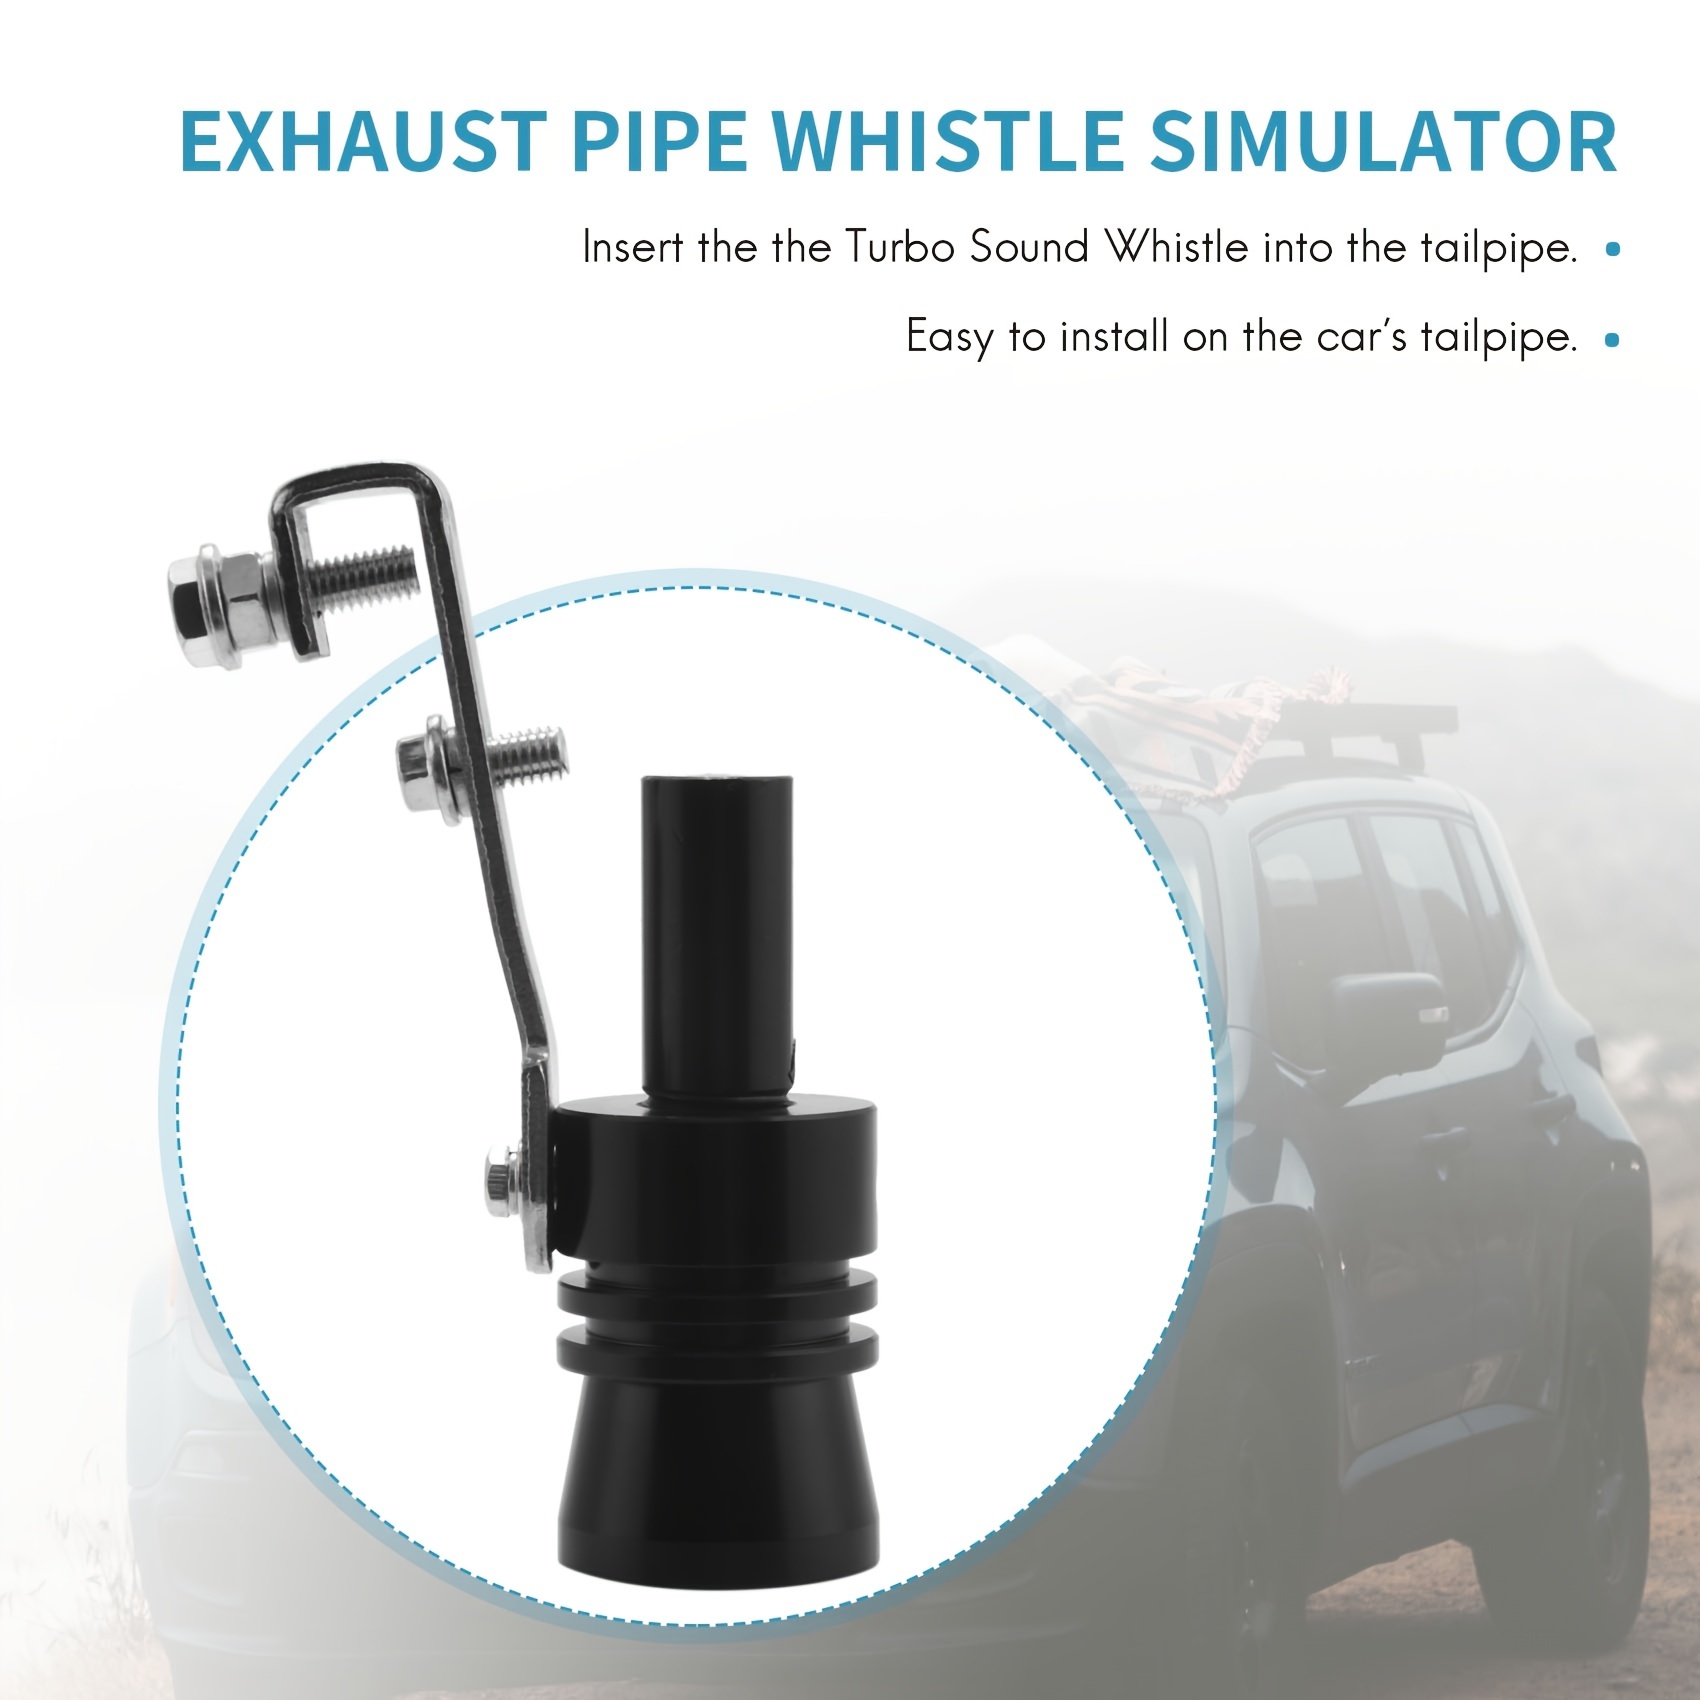 Black Xl Size Car Sound Whistle, Simulator Turbo Whistle With Small Wrench  And Screws, High-quality & Affordable